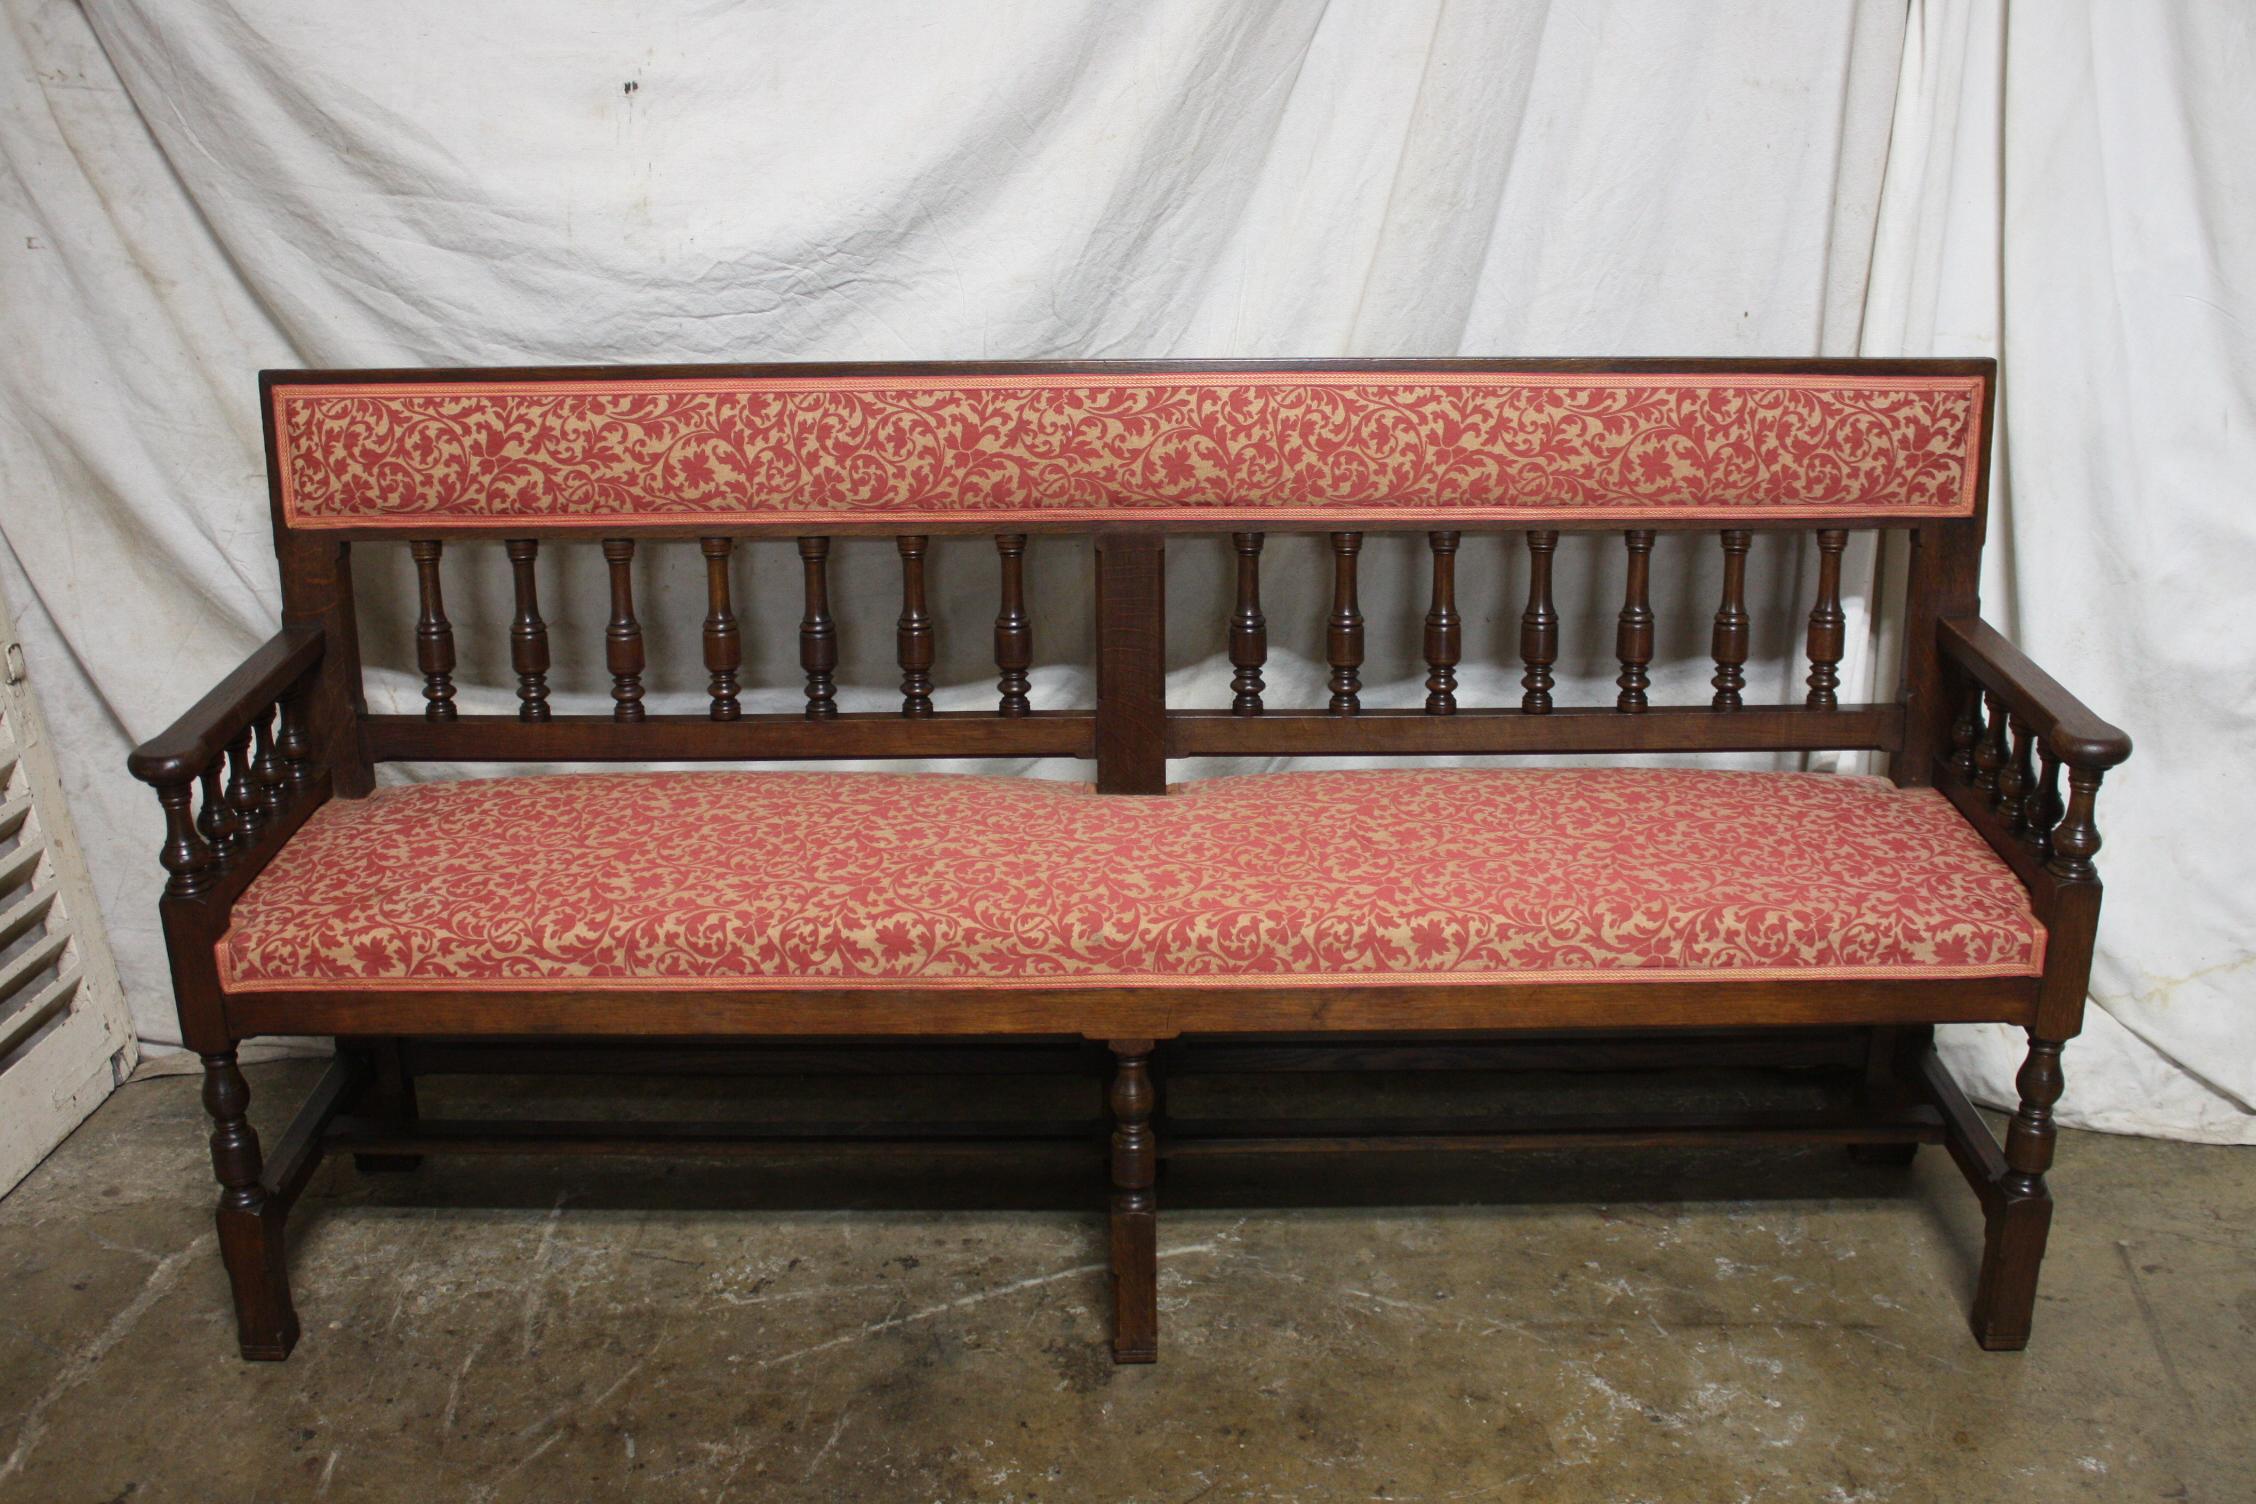 Very nice old bench with an old fabric and in a good condition. Narrow it can be place anywhere in a house or on a porch.